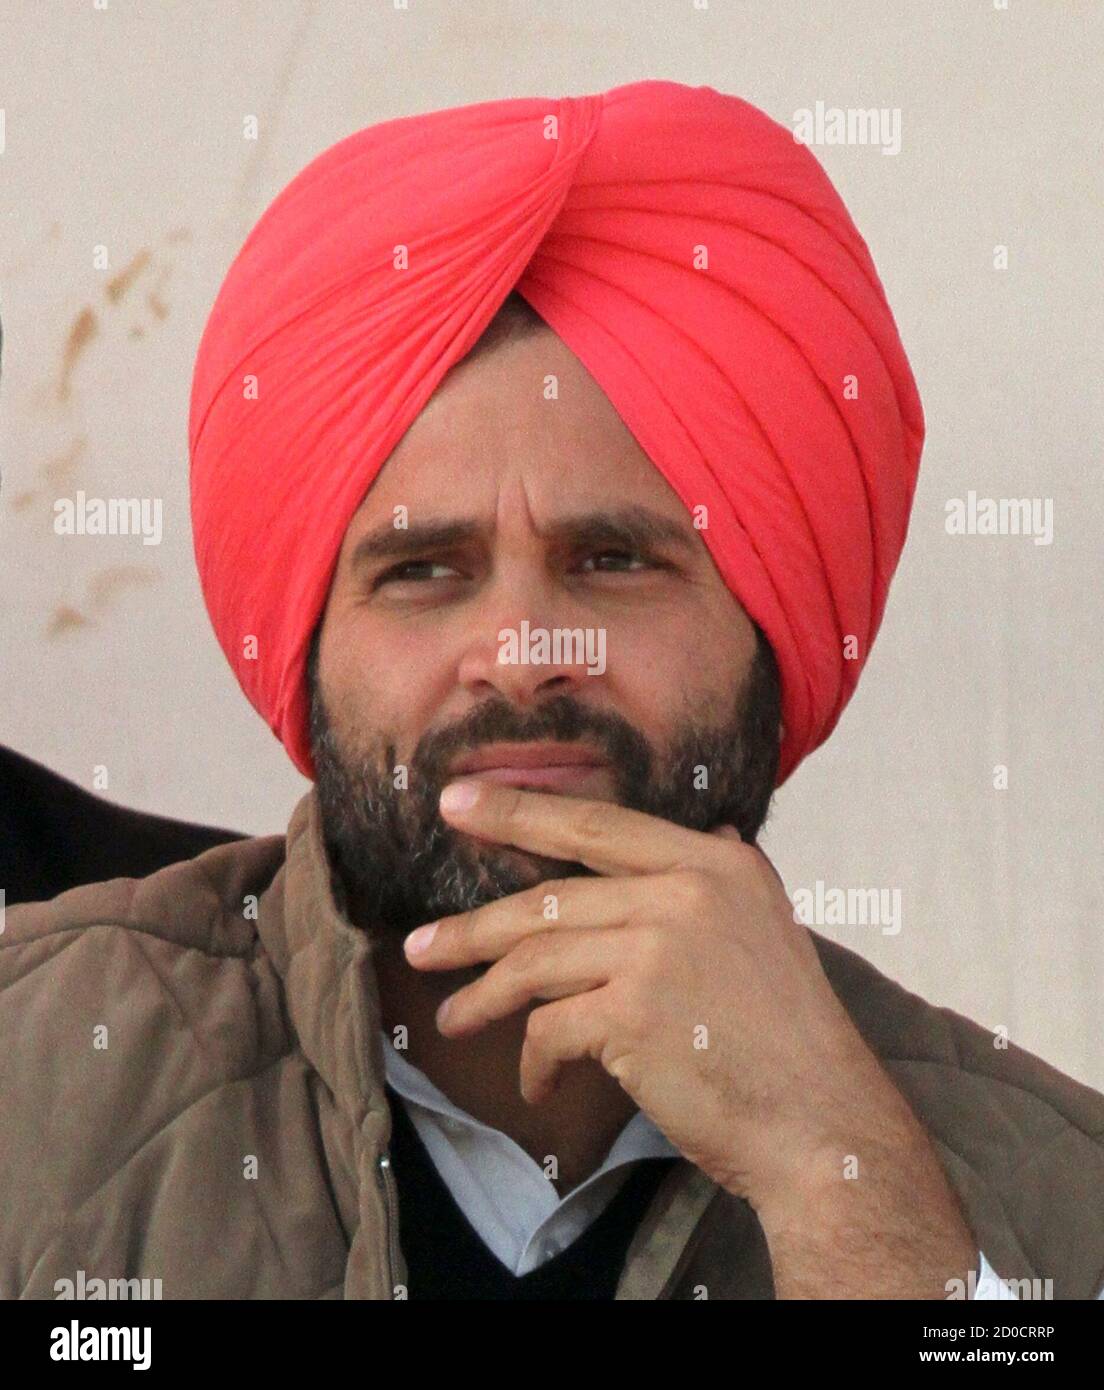 Rahul Gandhi, a lawmaker and son of India's ruling Congress party chief Sonia Gandhi, attends a campaign rally ahead of state assembly elections at Sirhind in the northern Indian state of Punjab January 27, 2012.  REUTERS/Ajay Verma (INDIA - Tags: ELECTIONS POLITICS) Stock Photo